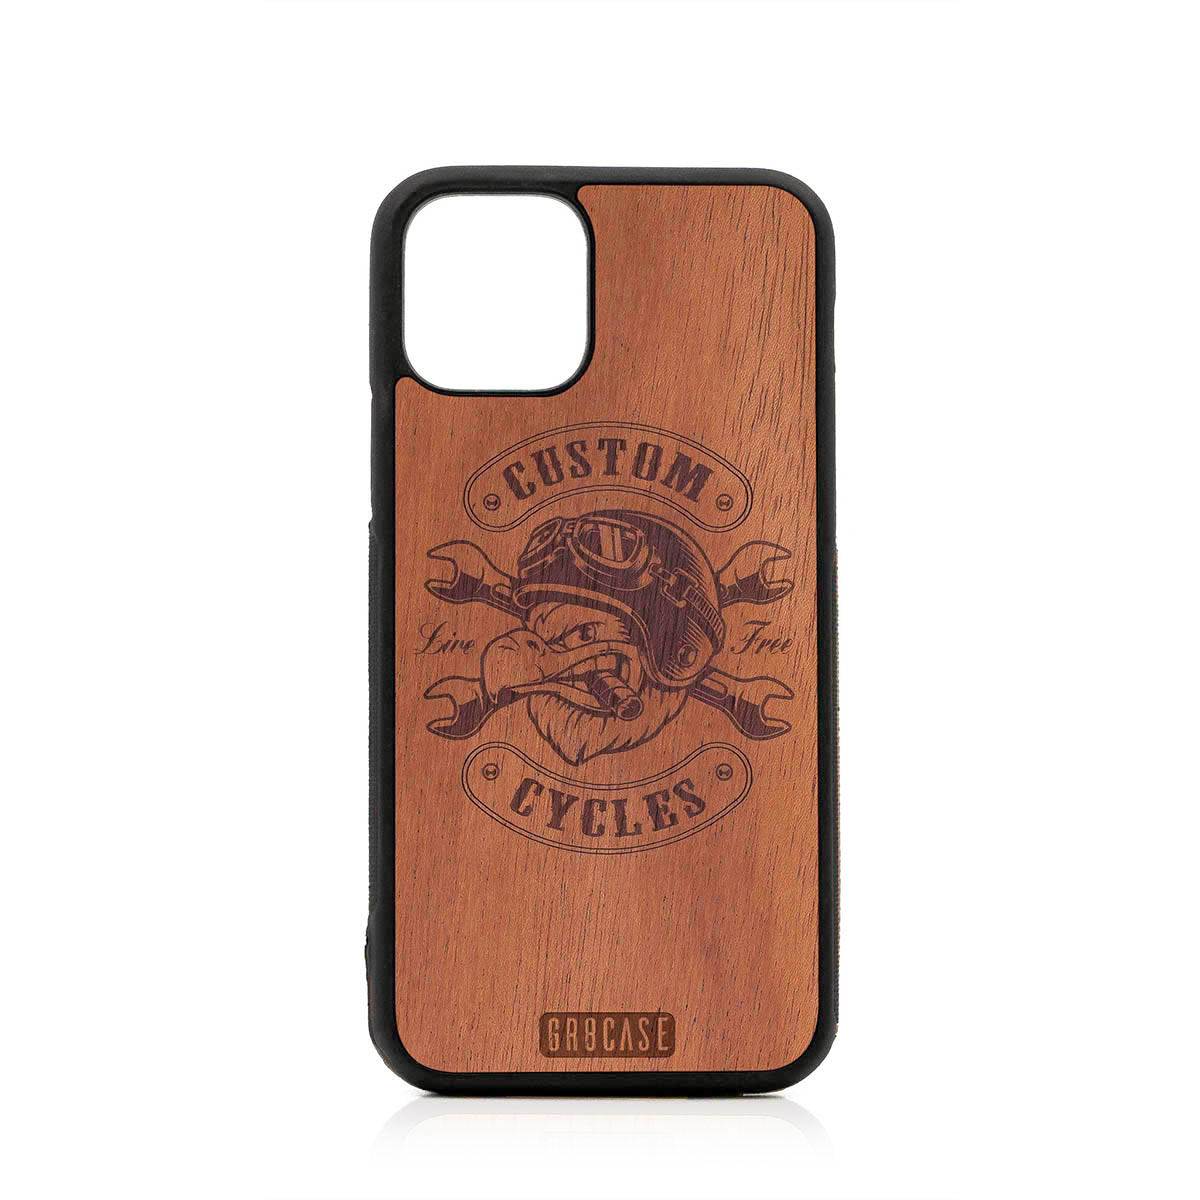 Custom Cycles Live Free (Biker Eagle) Design Wood Case For iPhone 11 Pro by GR8CASE